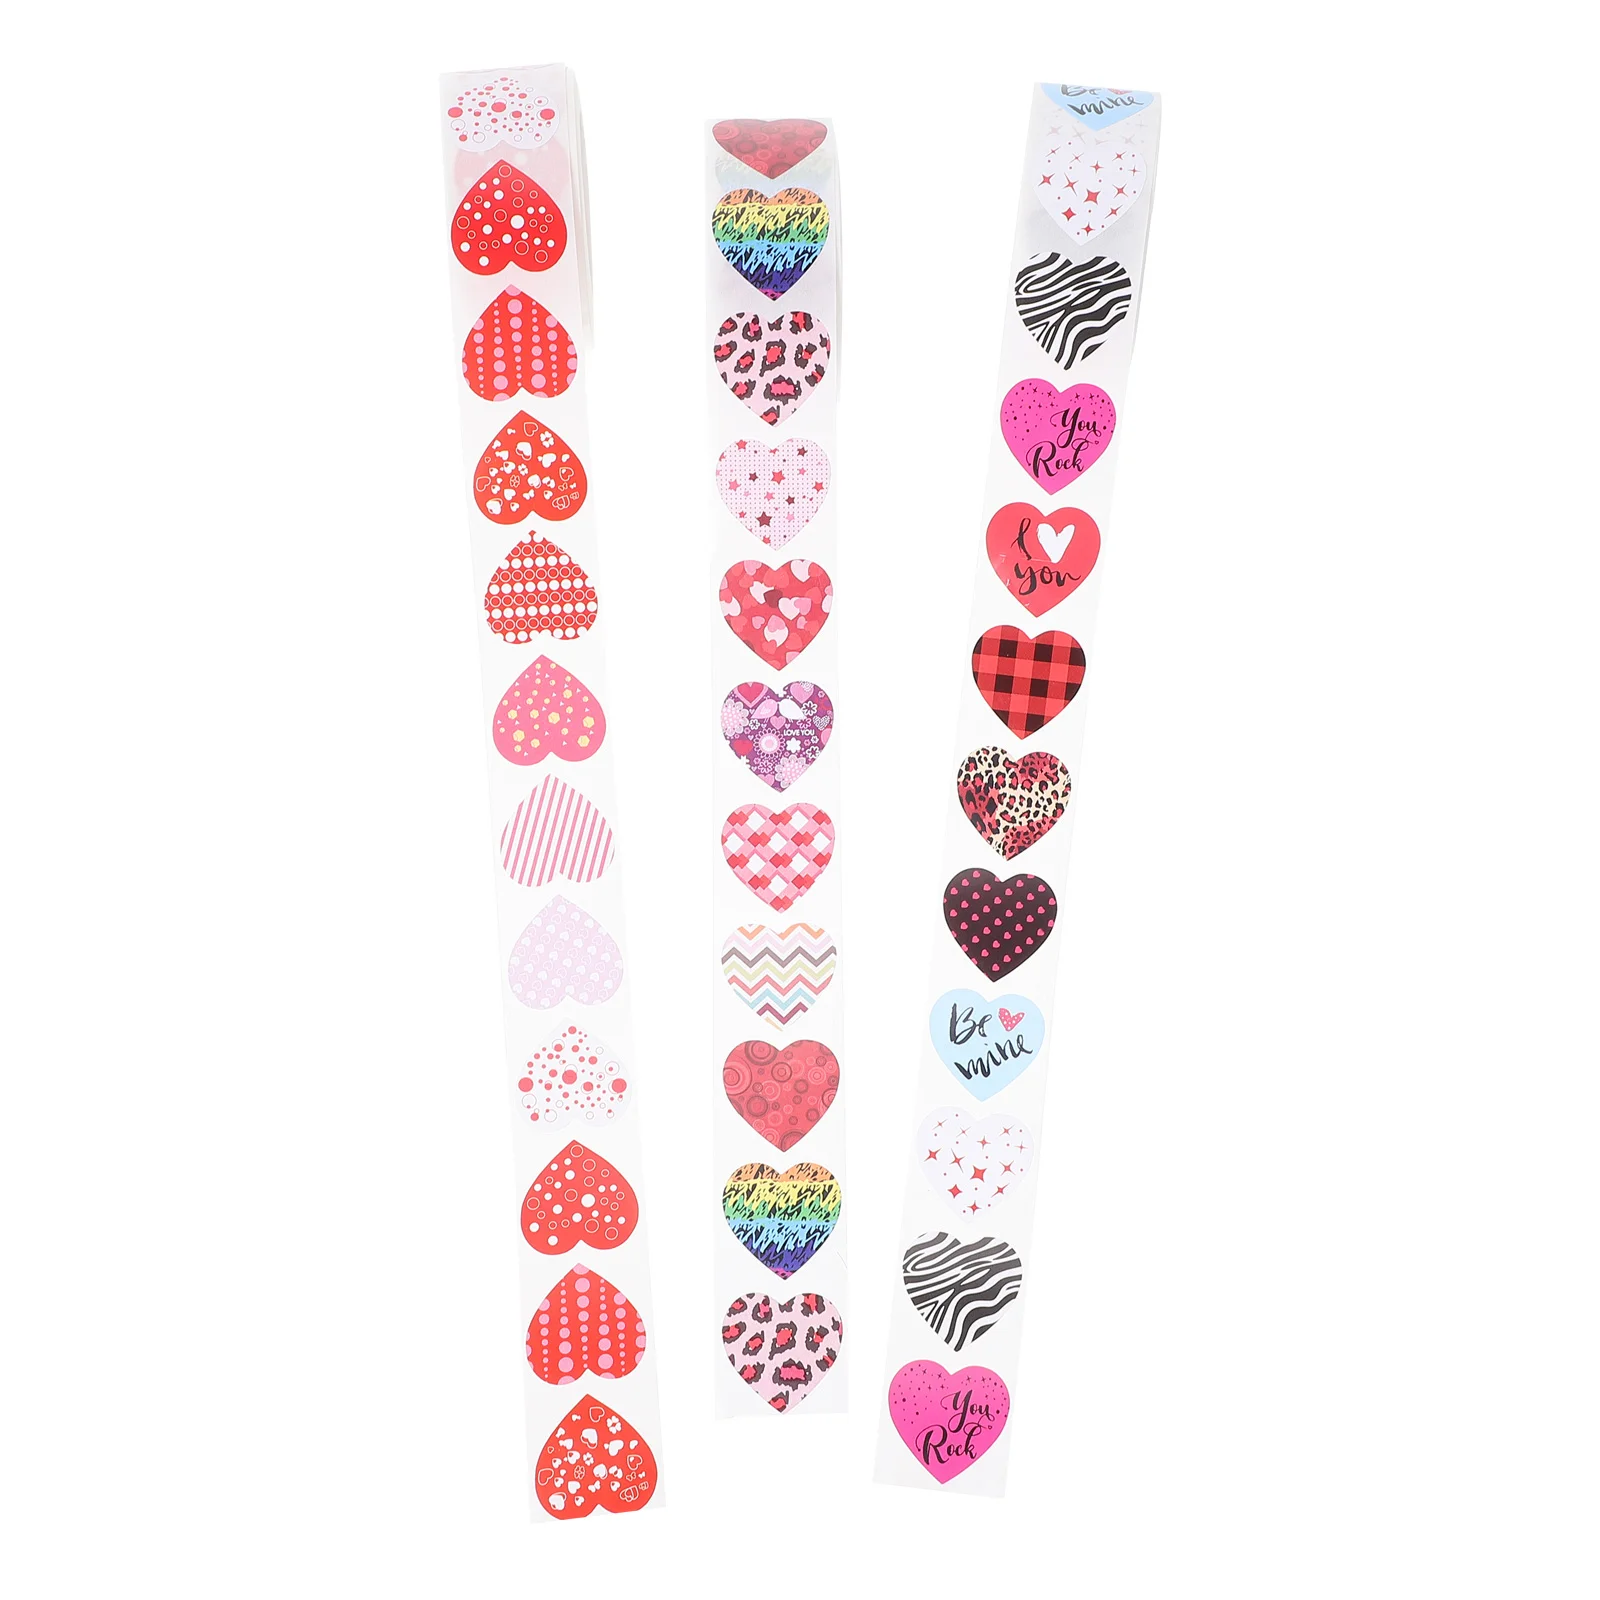 

Stickers Gift Day S Label Valentine Heart Labels Adhesive Tag Envelope Decals Decorative Valentines Self Presents Wrapping Love